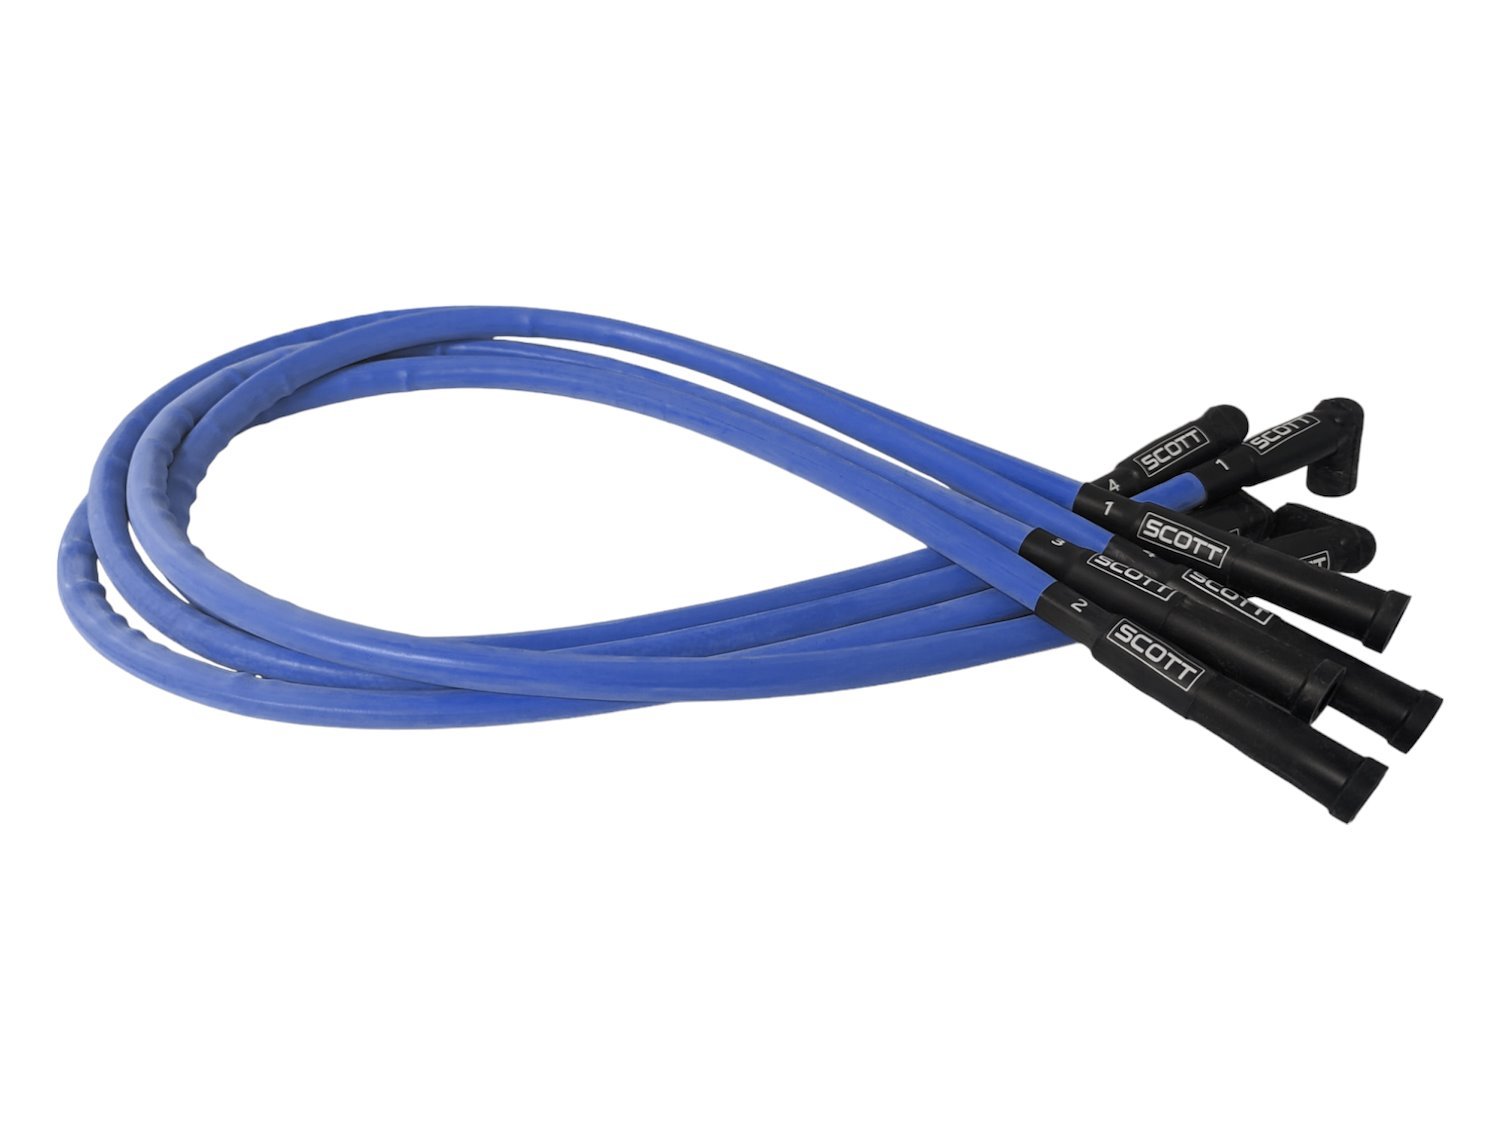 SPW-CH-23-4 High-Performance Silicone-Sleeved Spark Plug Wire Set for Ford 2.3L [Blue]